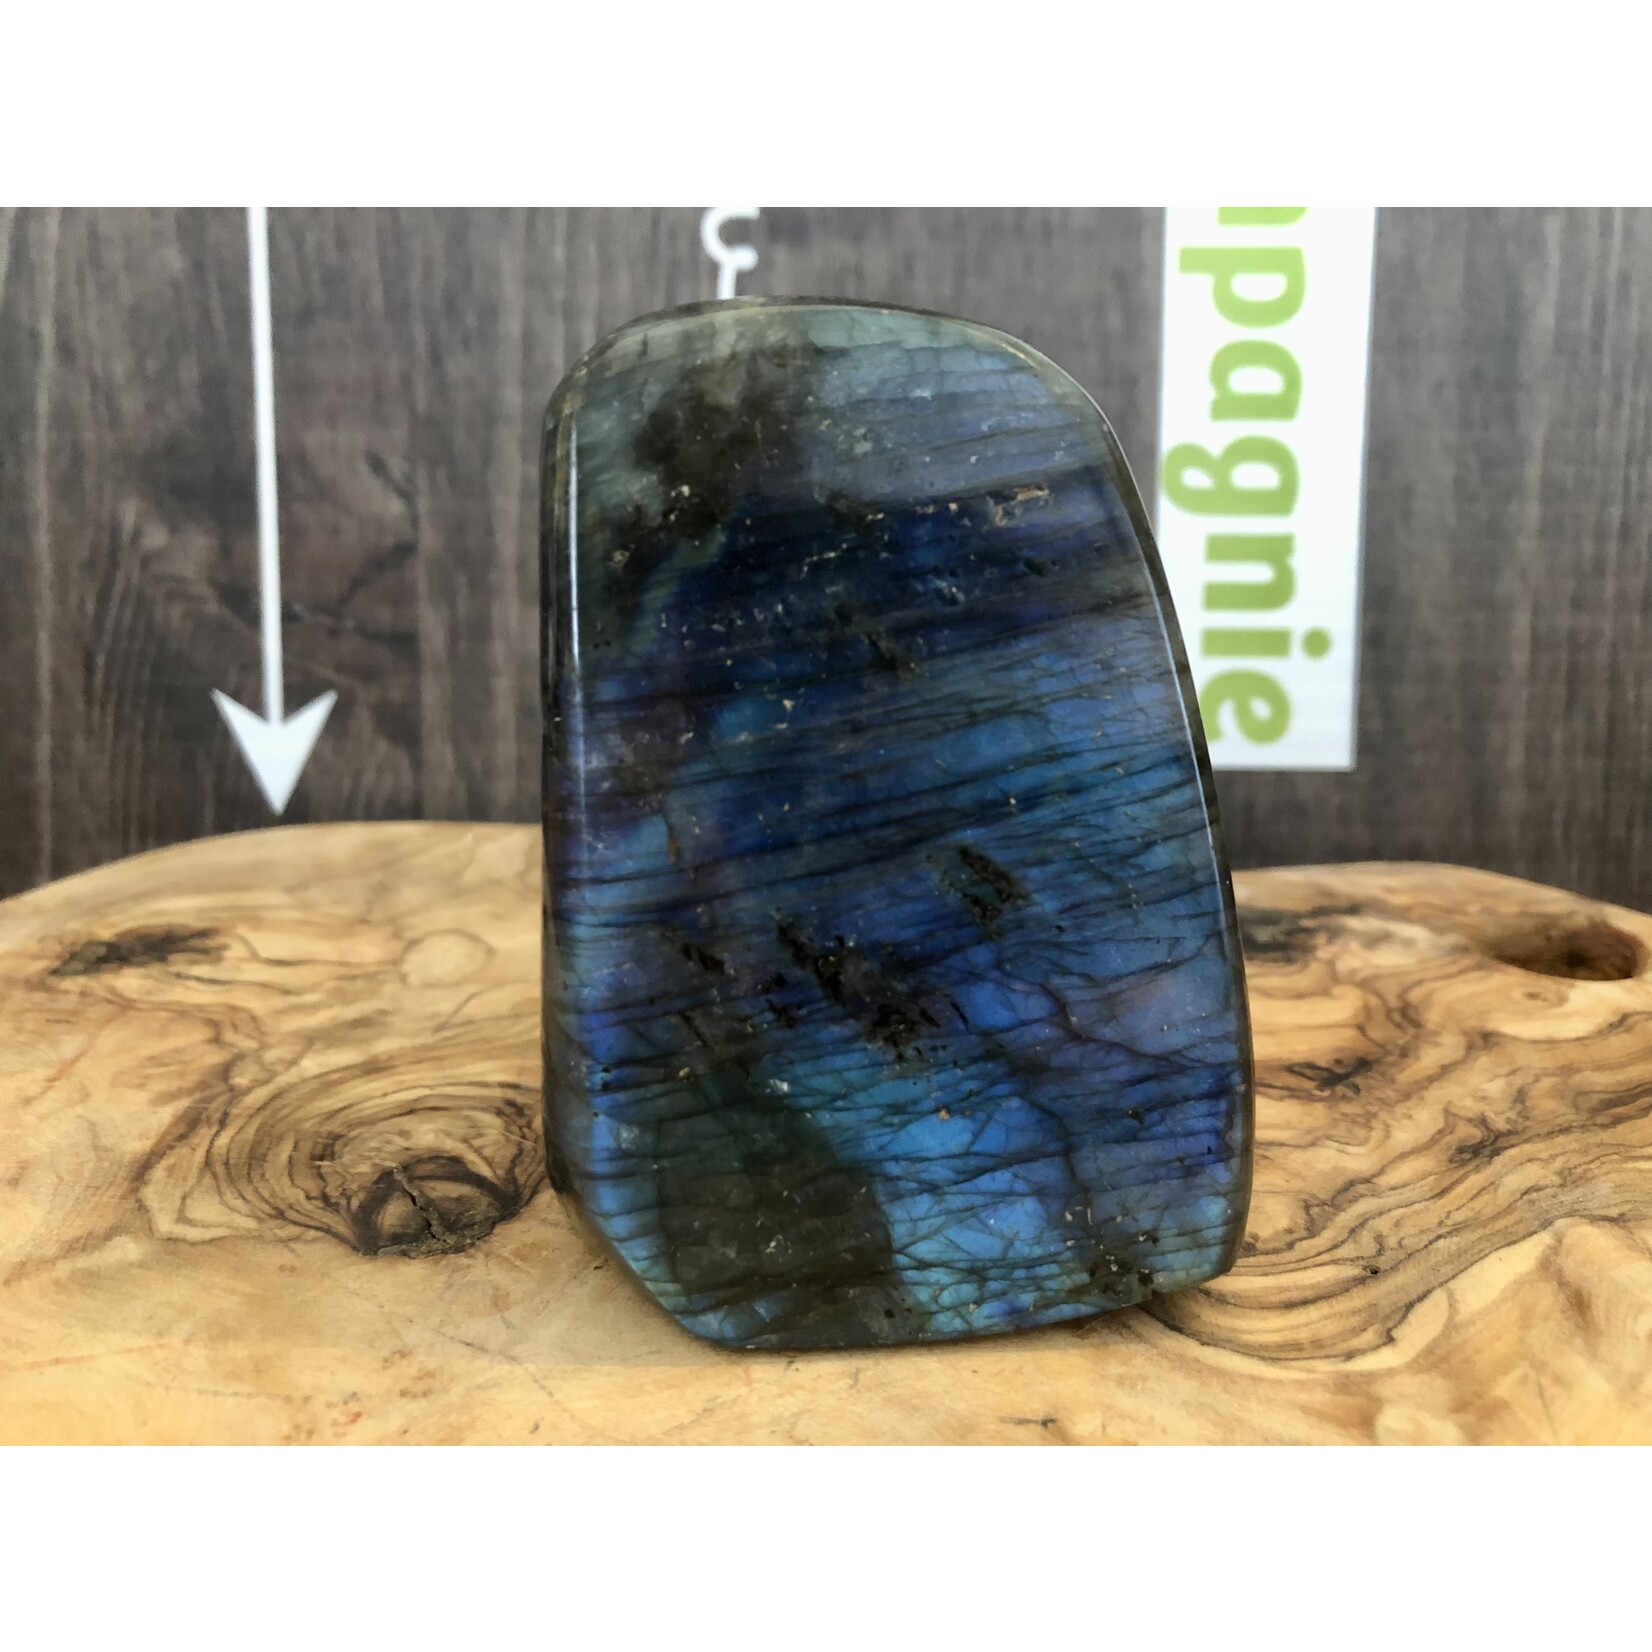 brilliant blue labradorite free form, stimulates the imagination and calms an overactive mind